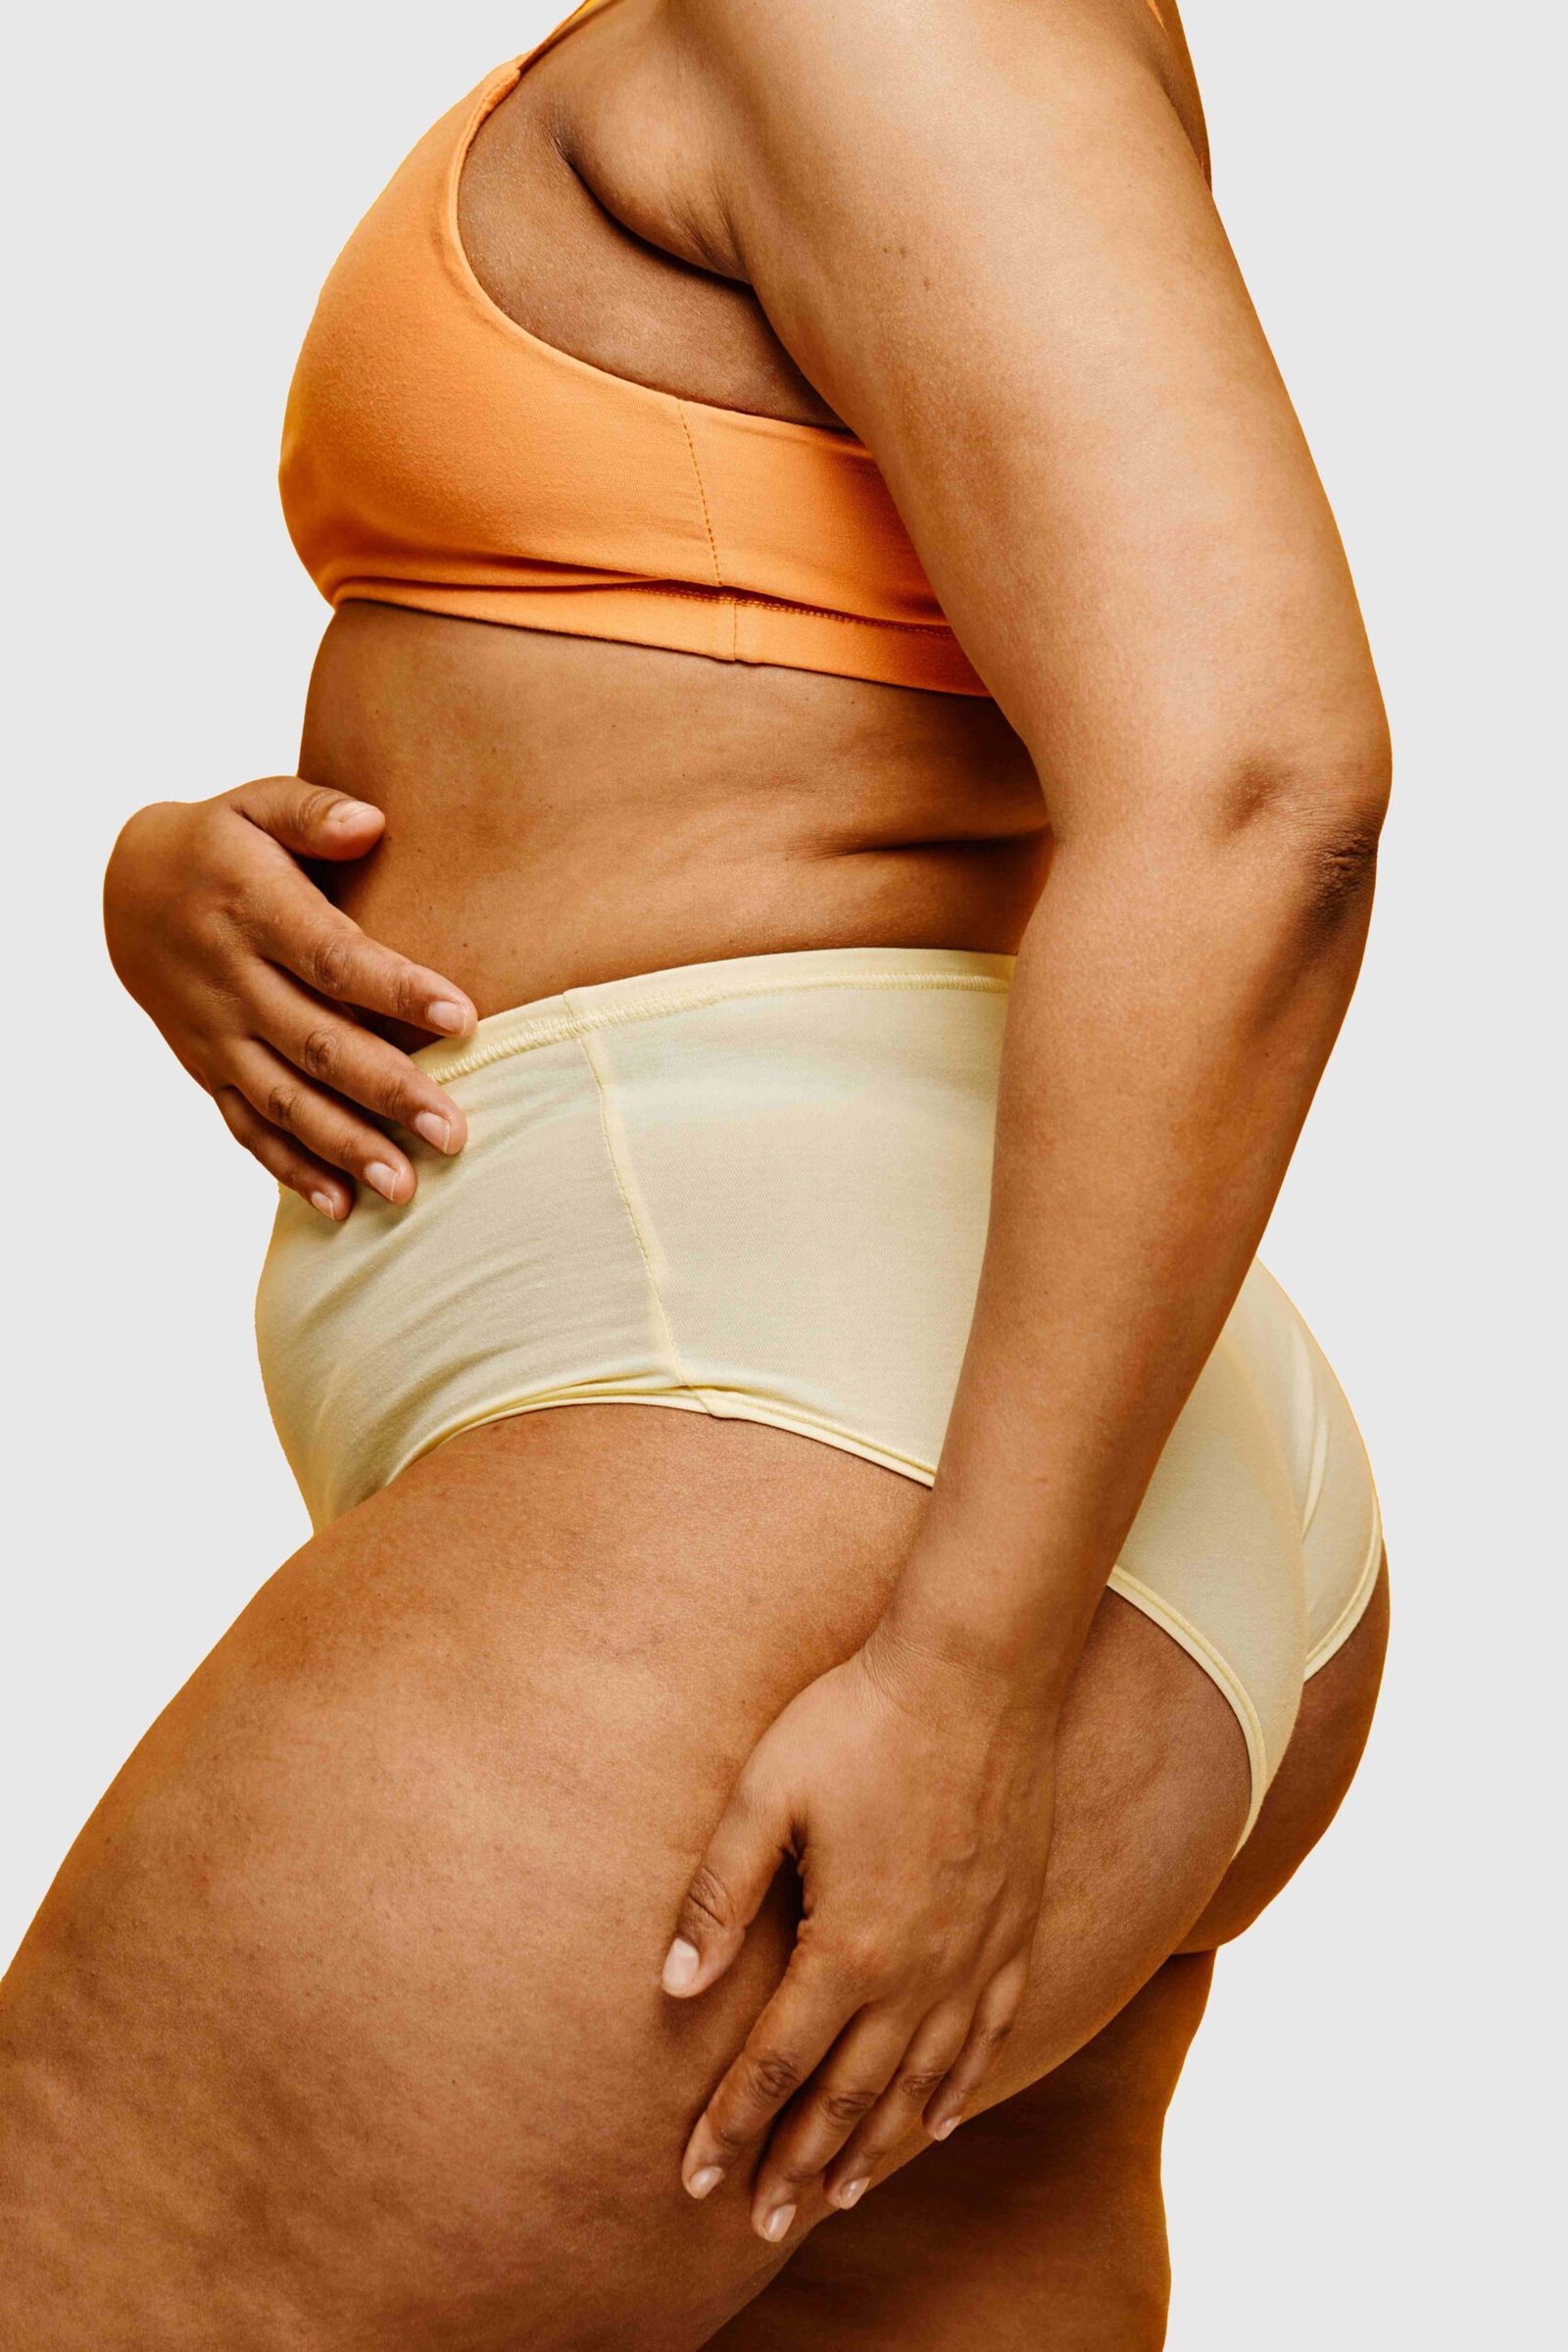 vertical-side-view-portrait-of-real-black-woman-wearing-underwear-against-vibrant-yellow-background copie (1)